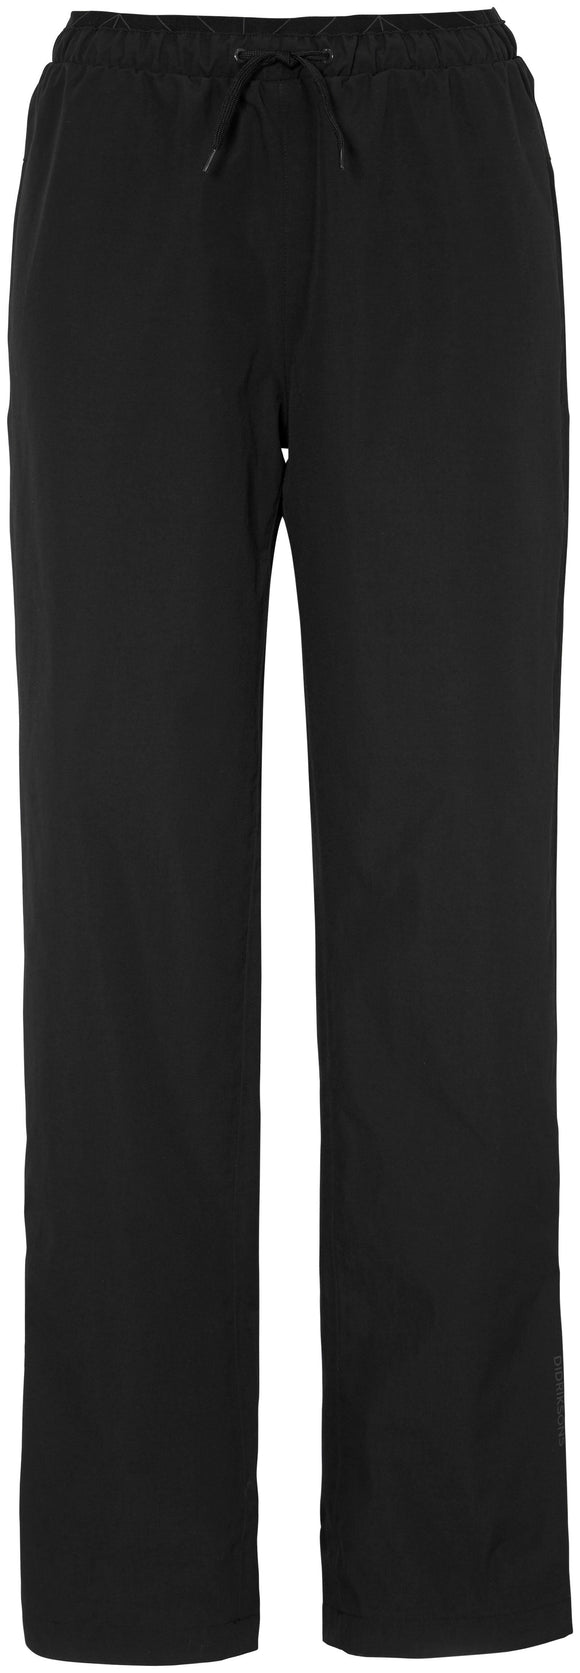 Didriksons Womens Hiking Trousers - Grit